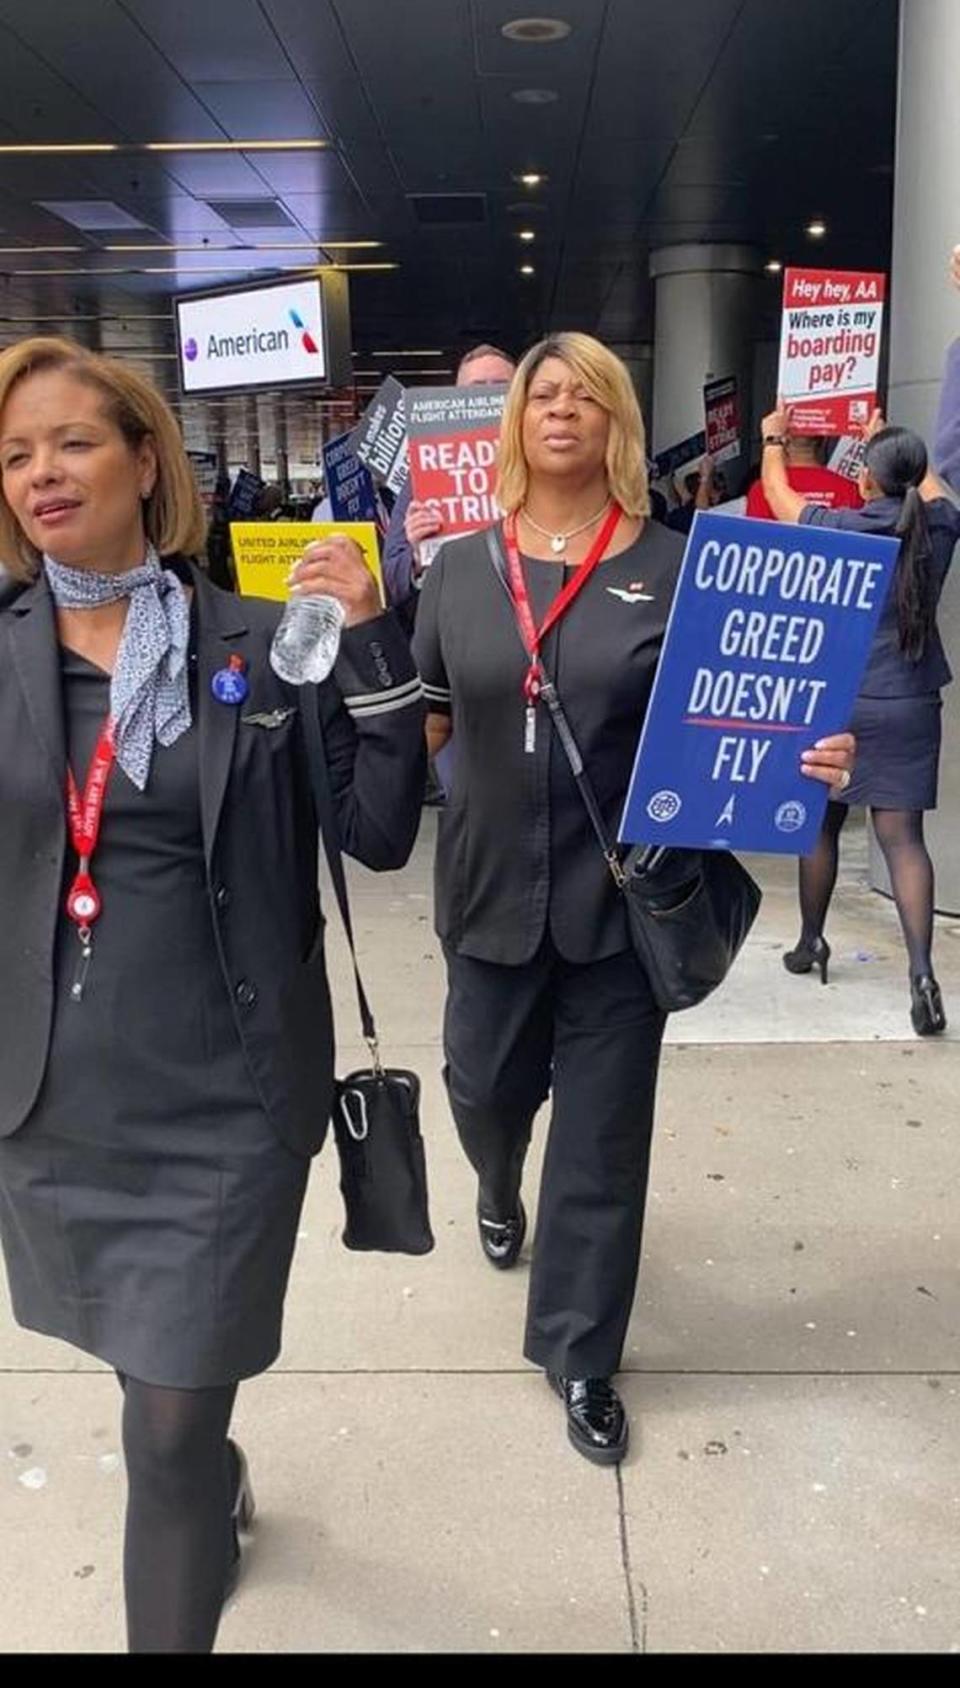 Flight attendants from American Airlines and others protest outside MIA on Feb. 14, 2023 for new contract, better pay.